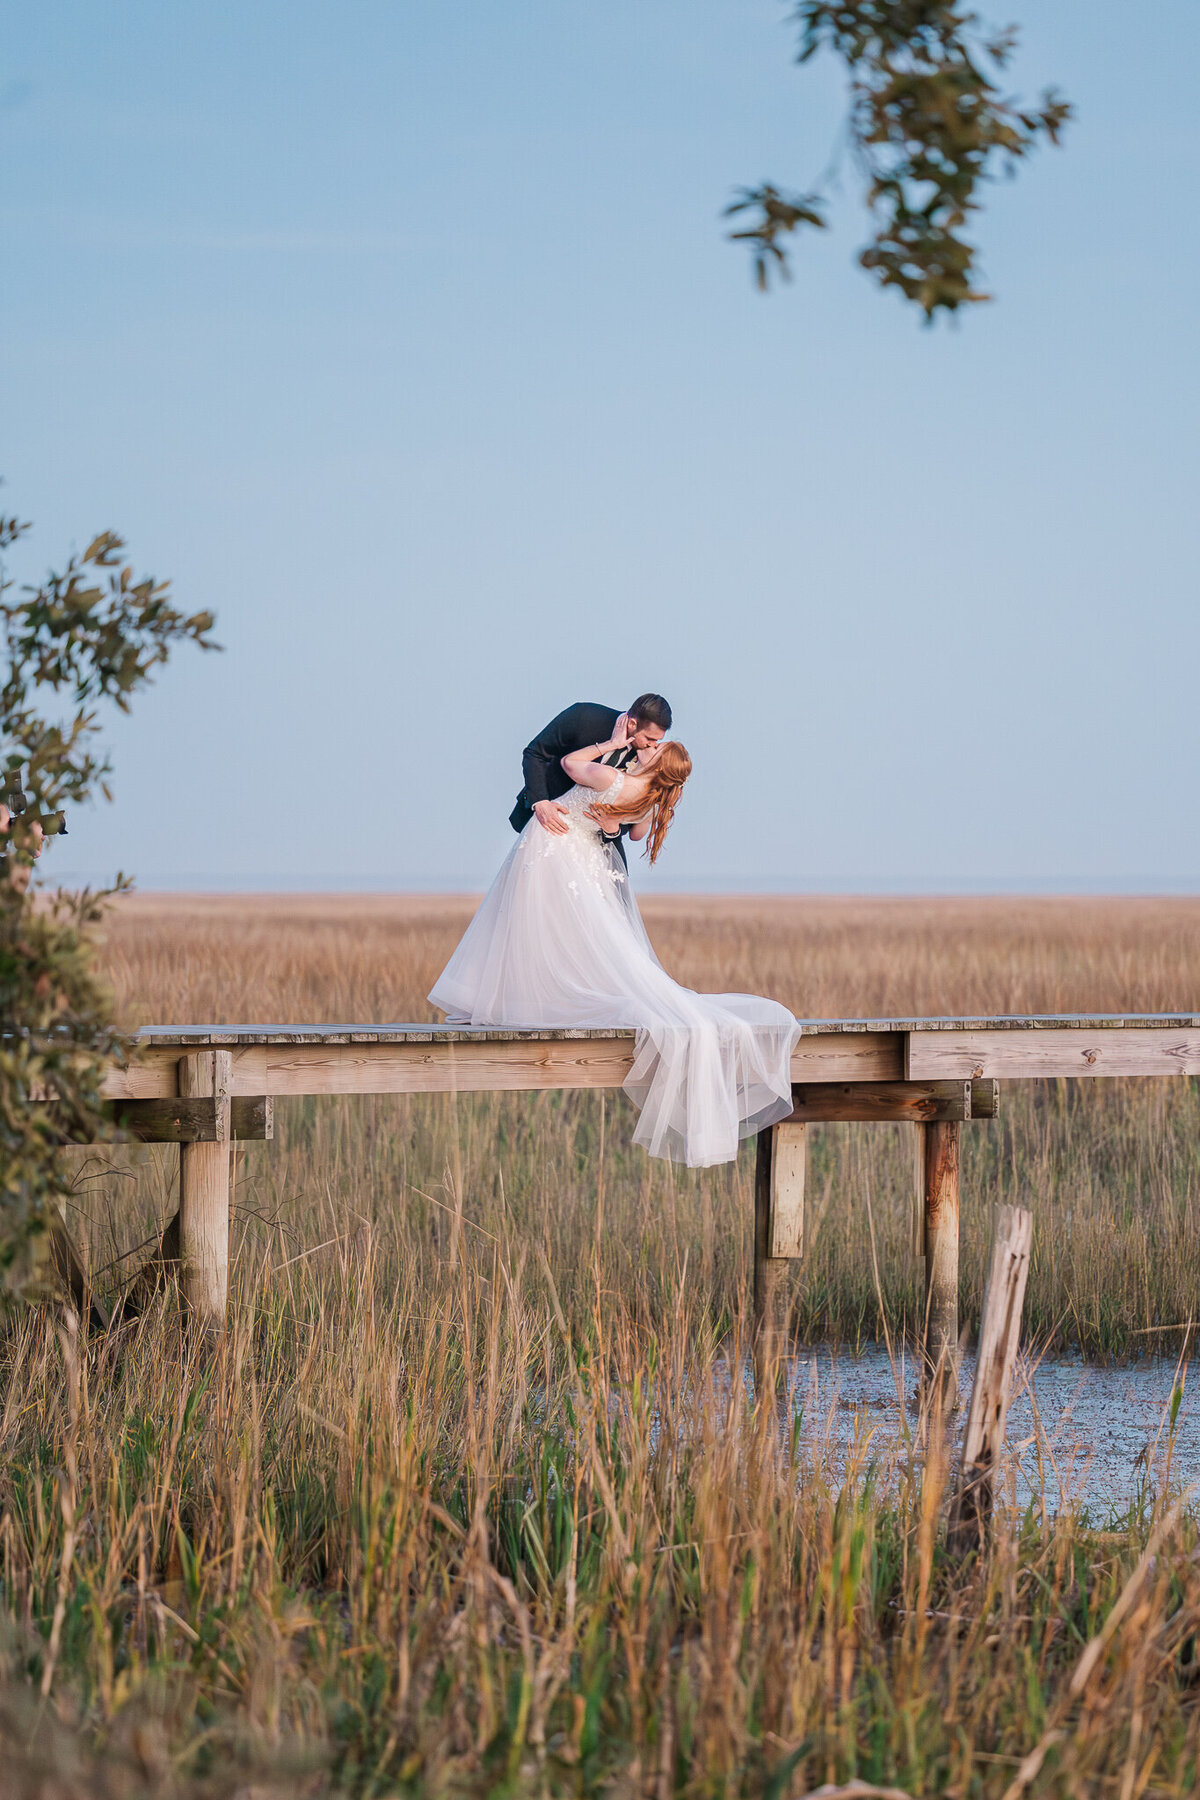 The last kiss of a wedding night at sunset by JoLynn Photography